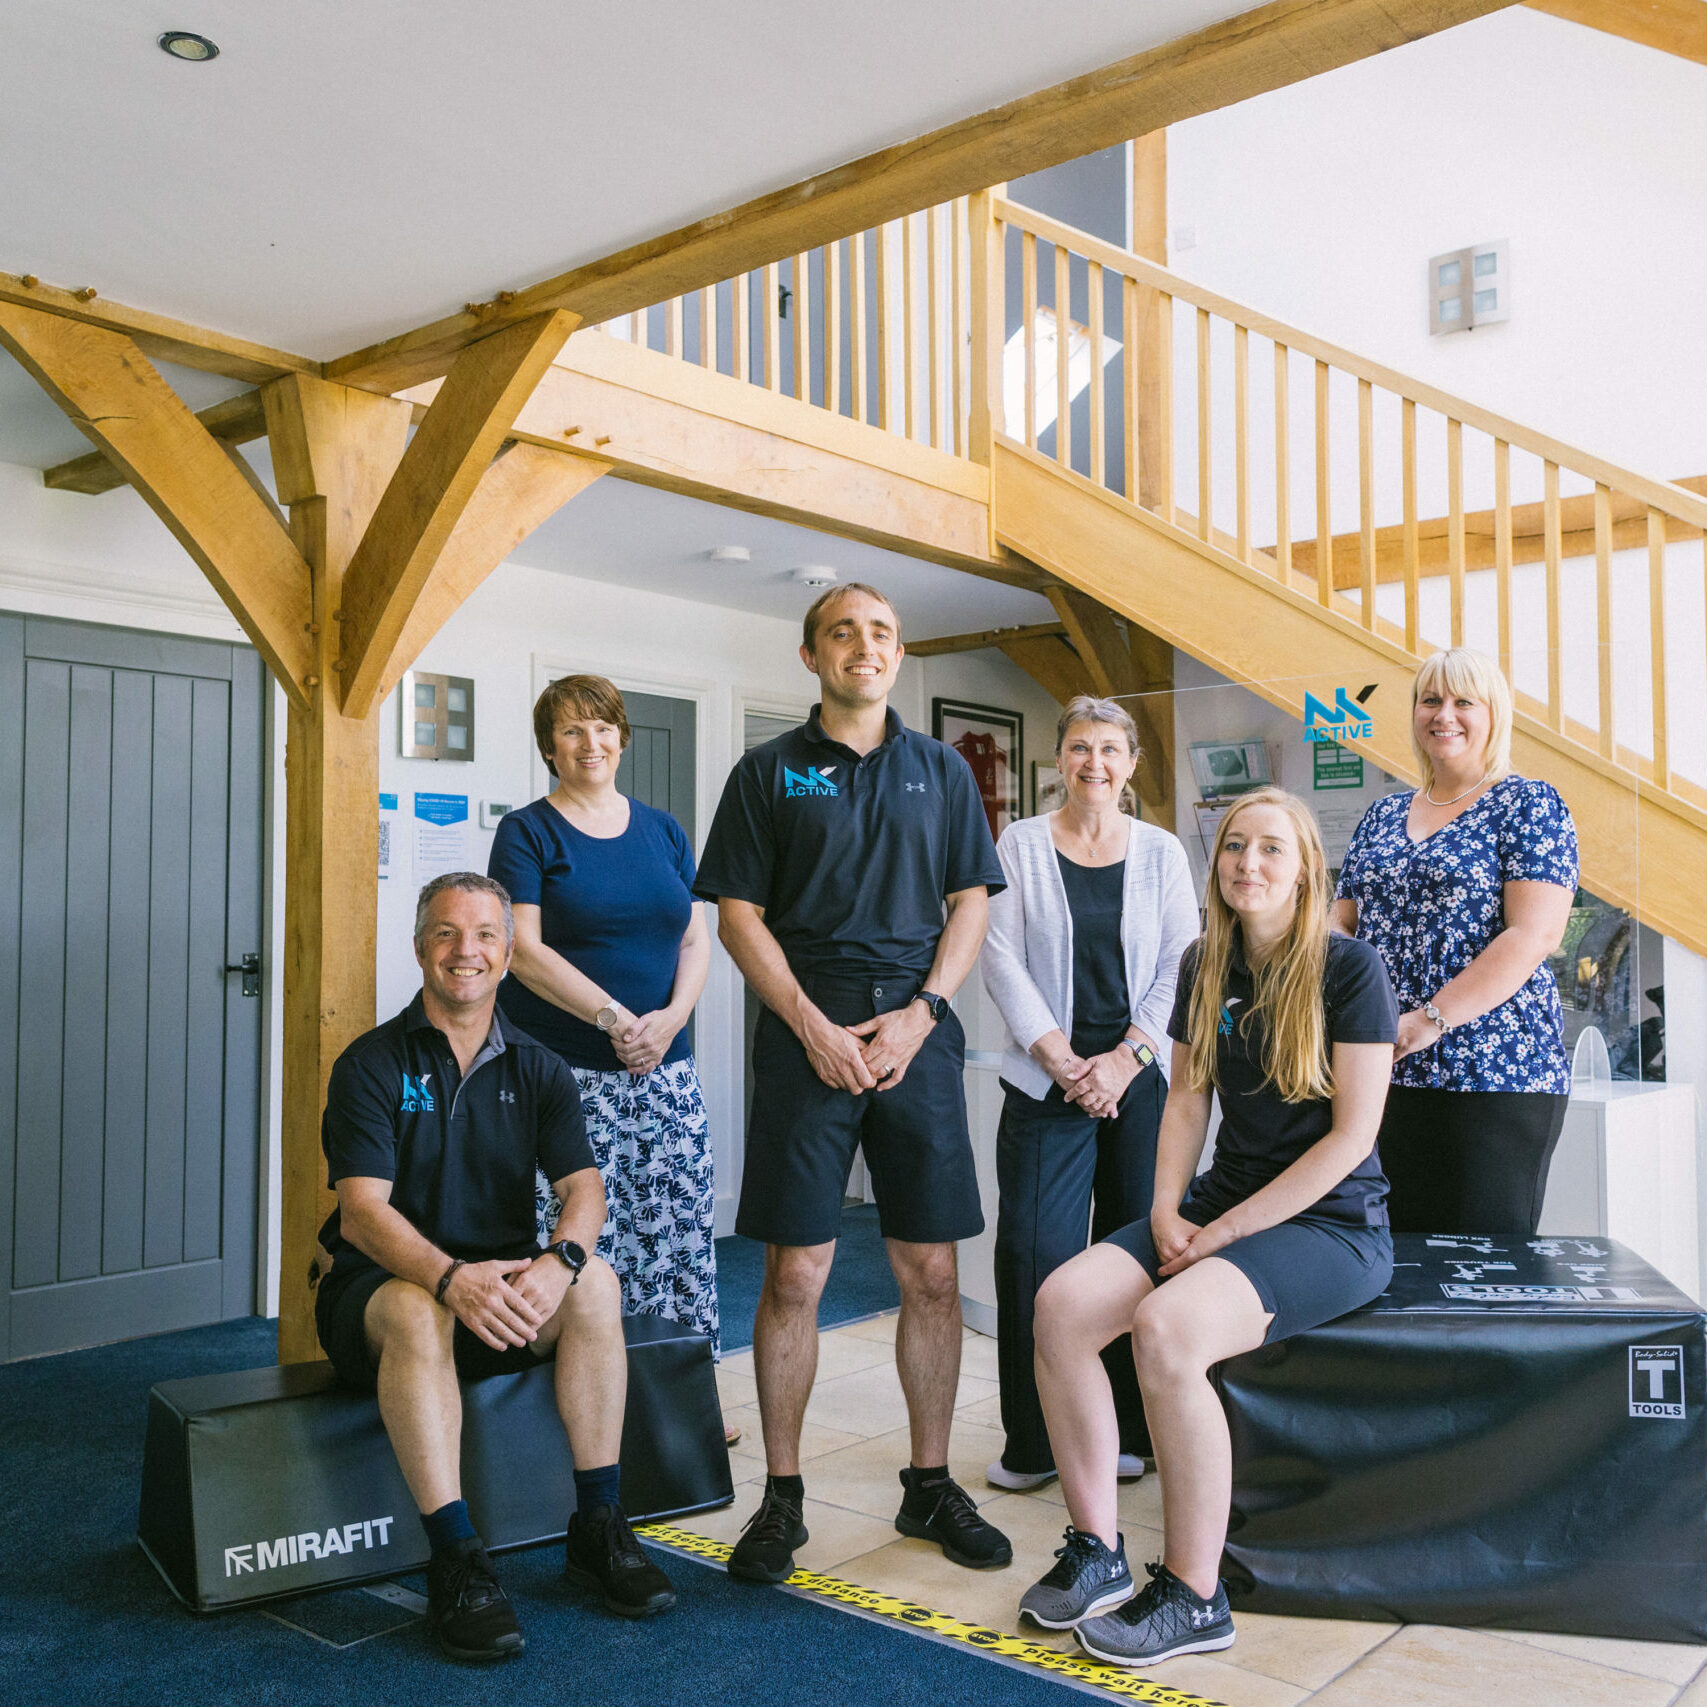 Meet the NK Active team | Sport injury rehabilitation and musculoskeletal clinic Hampshire